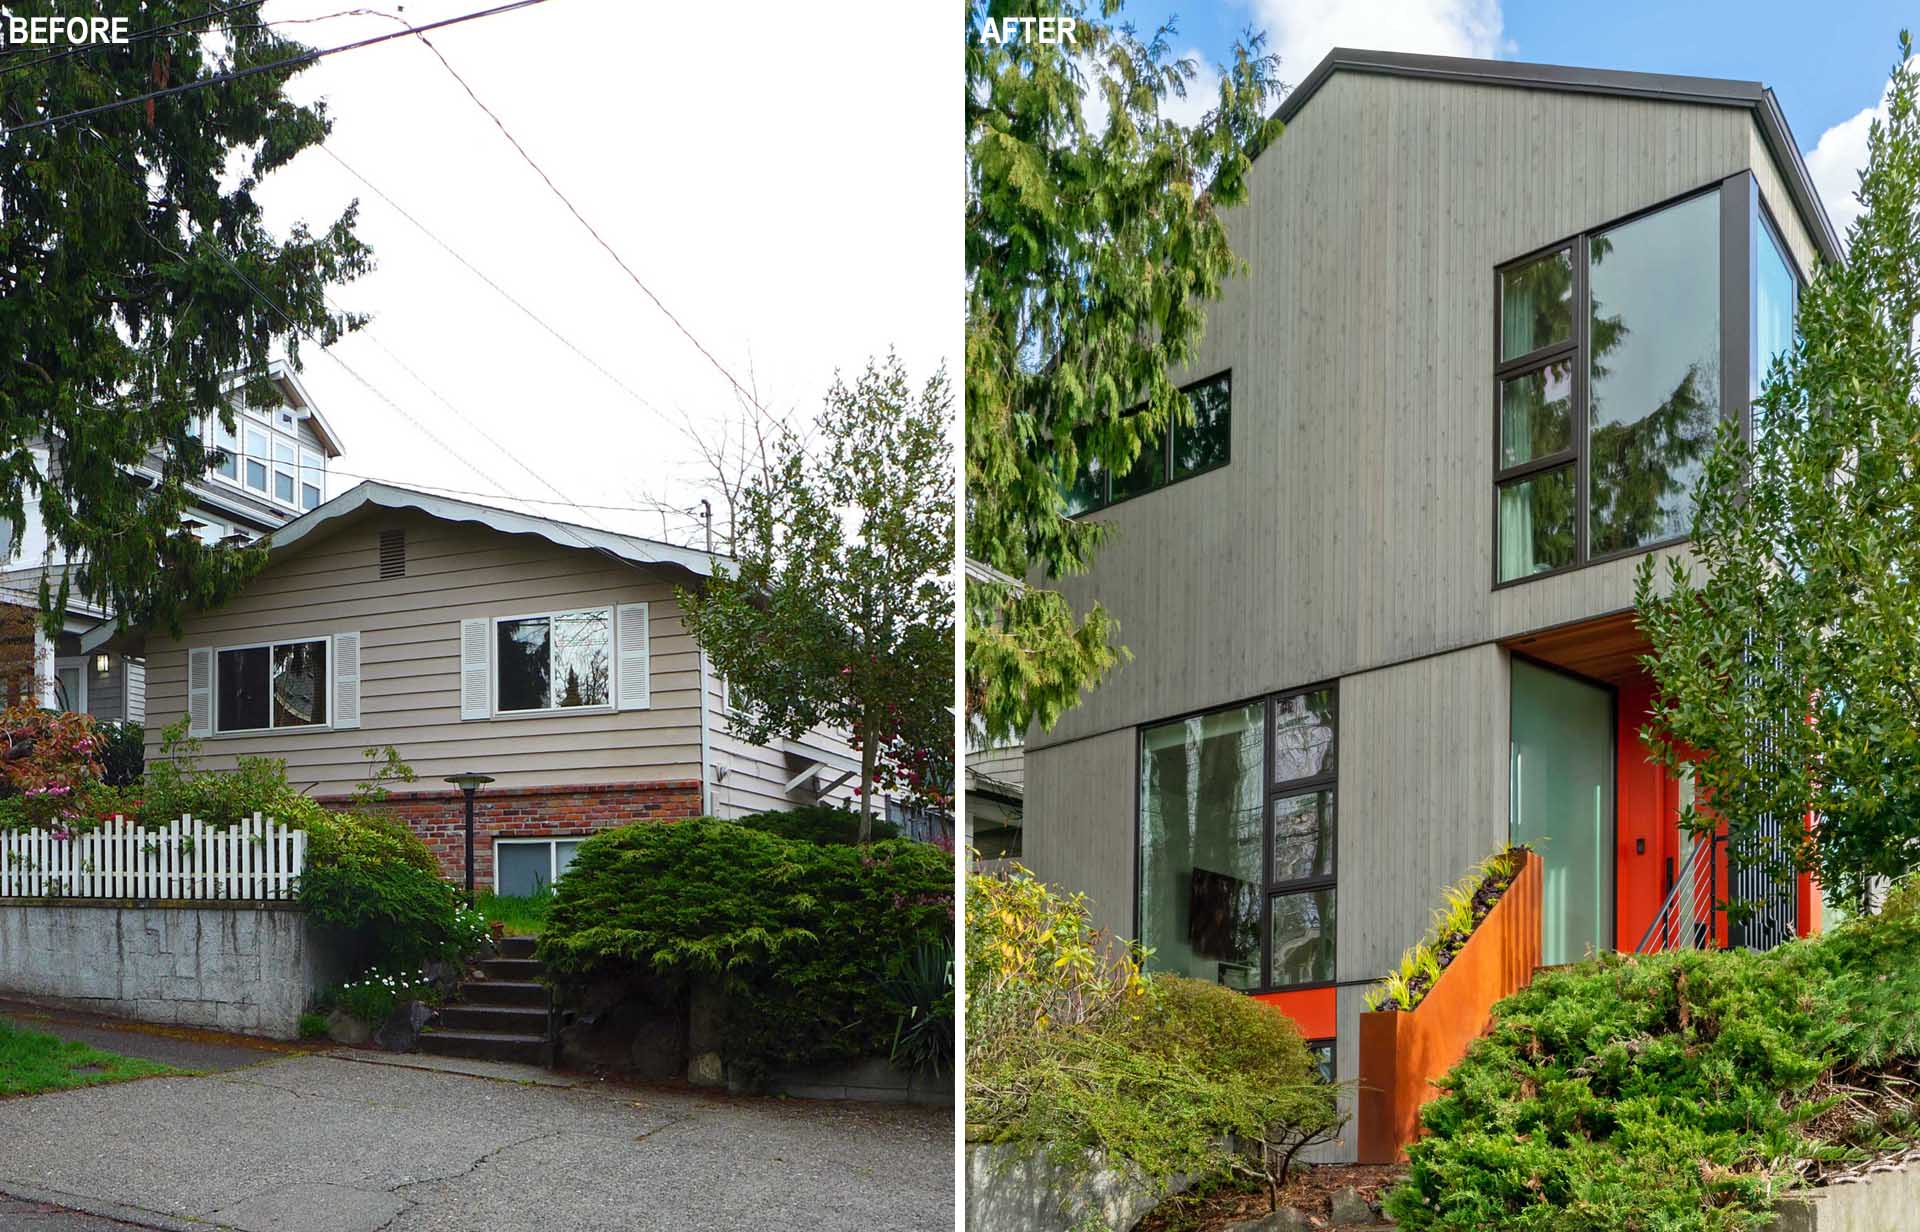 Before & After - A 1960s home was remodeled into a modern house.